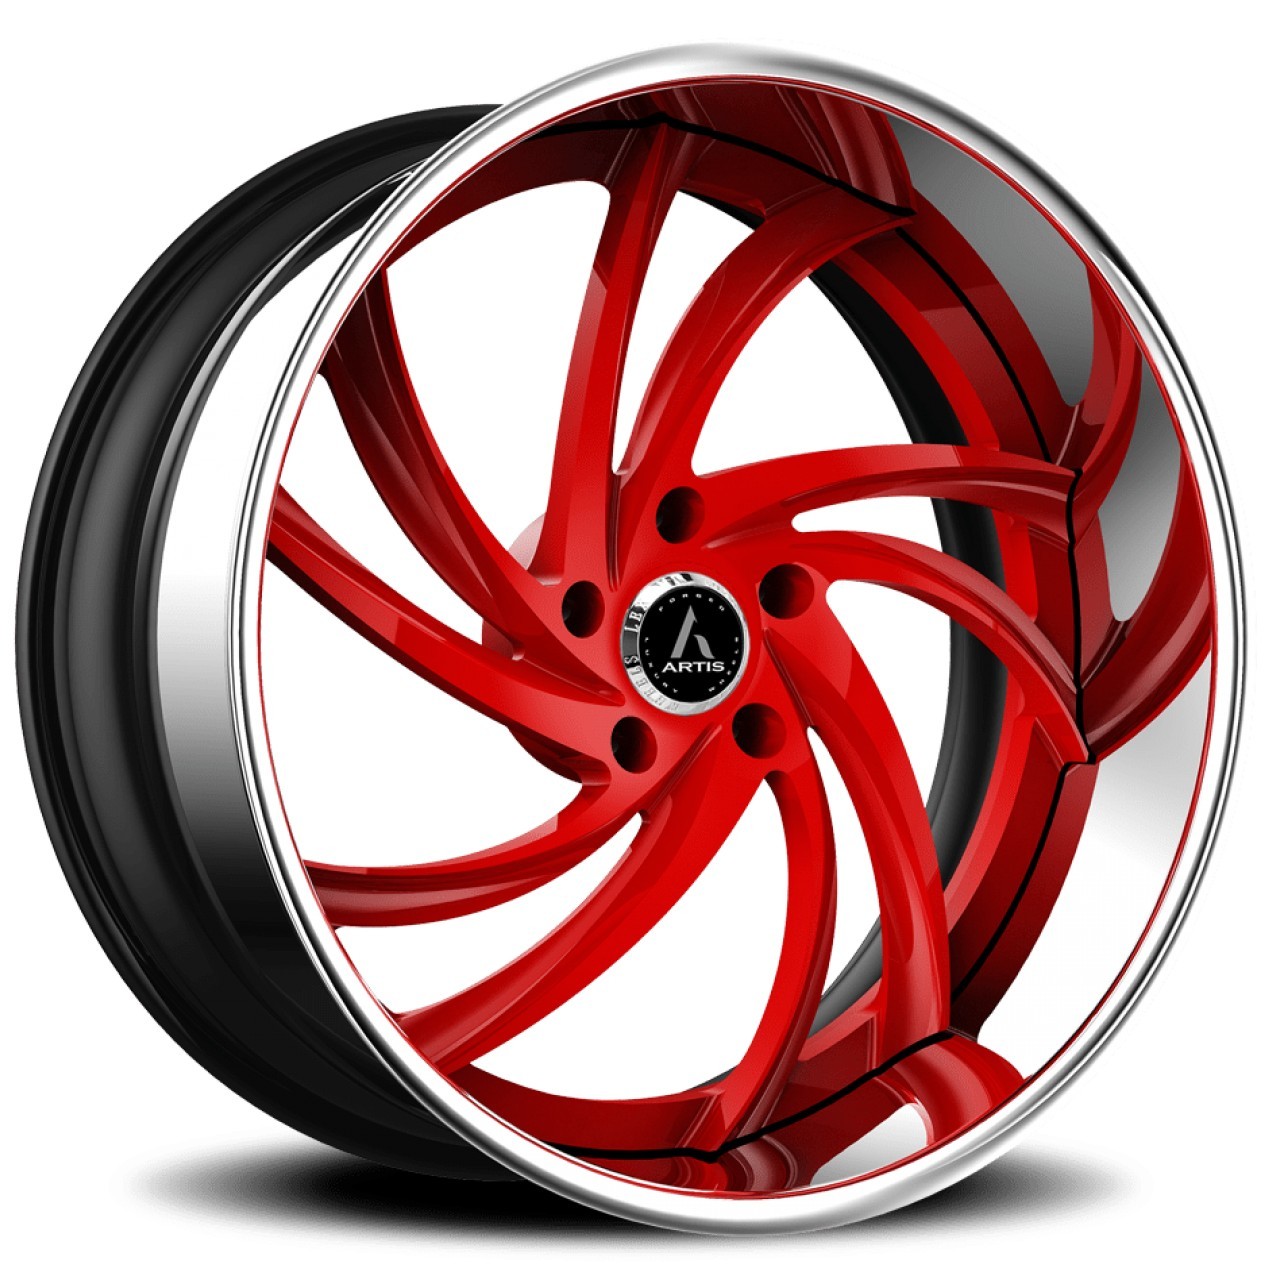 Artis Twister forged wheels